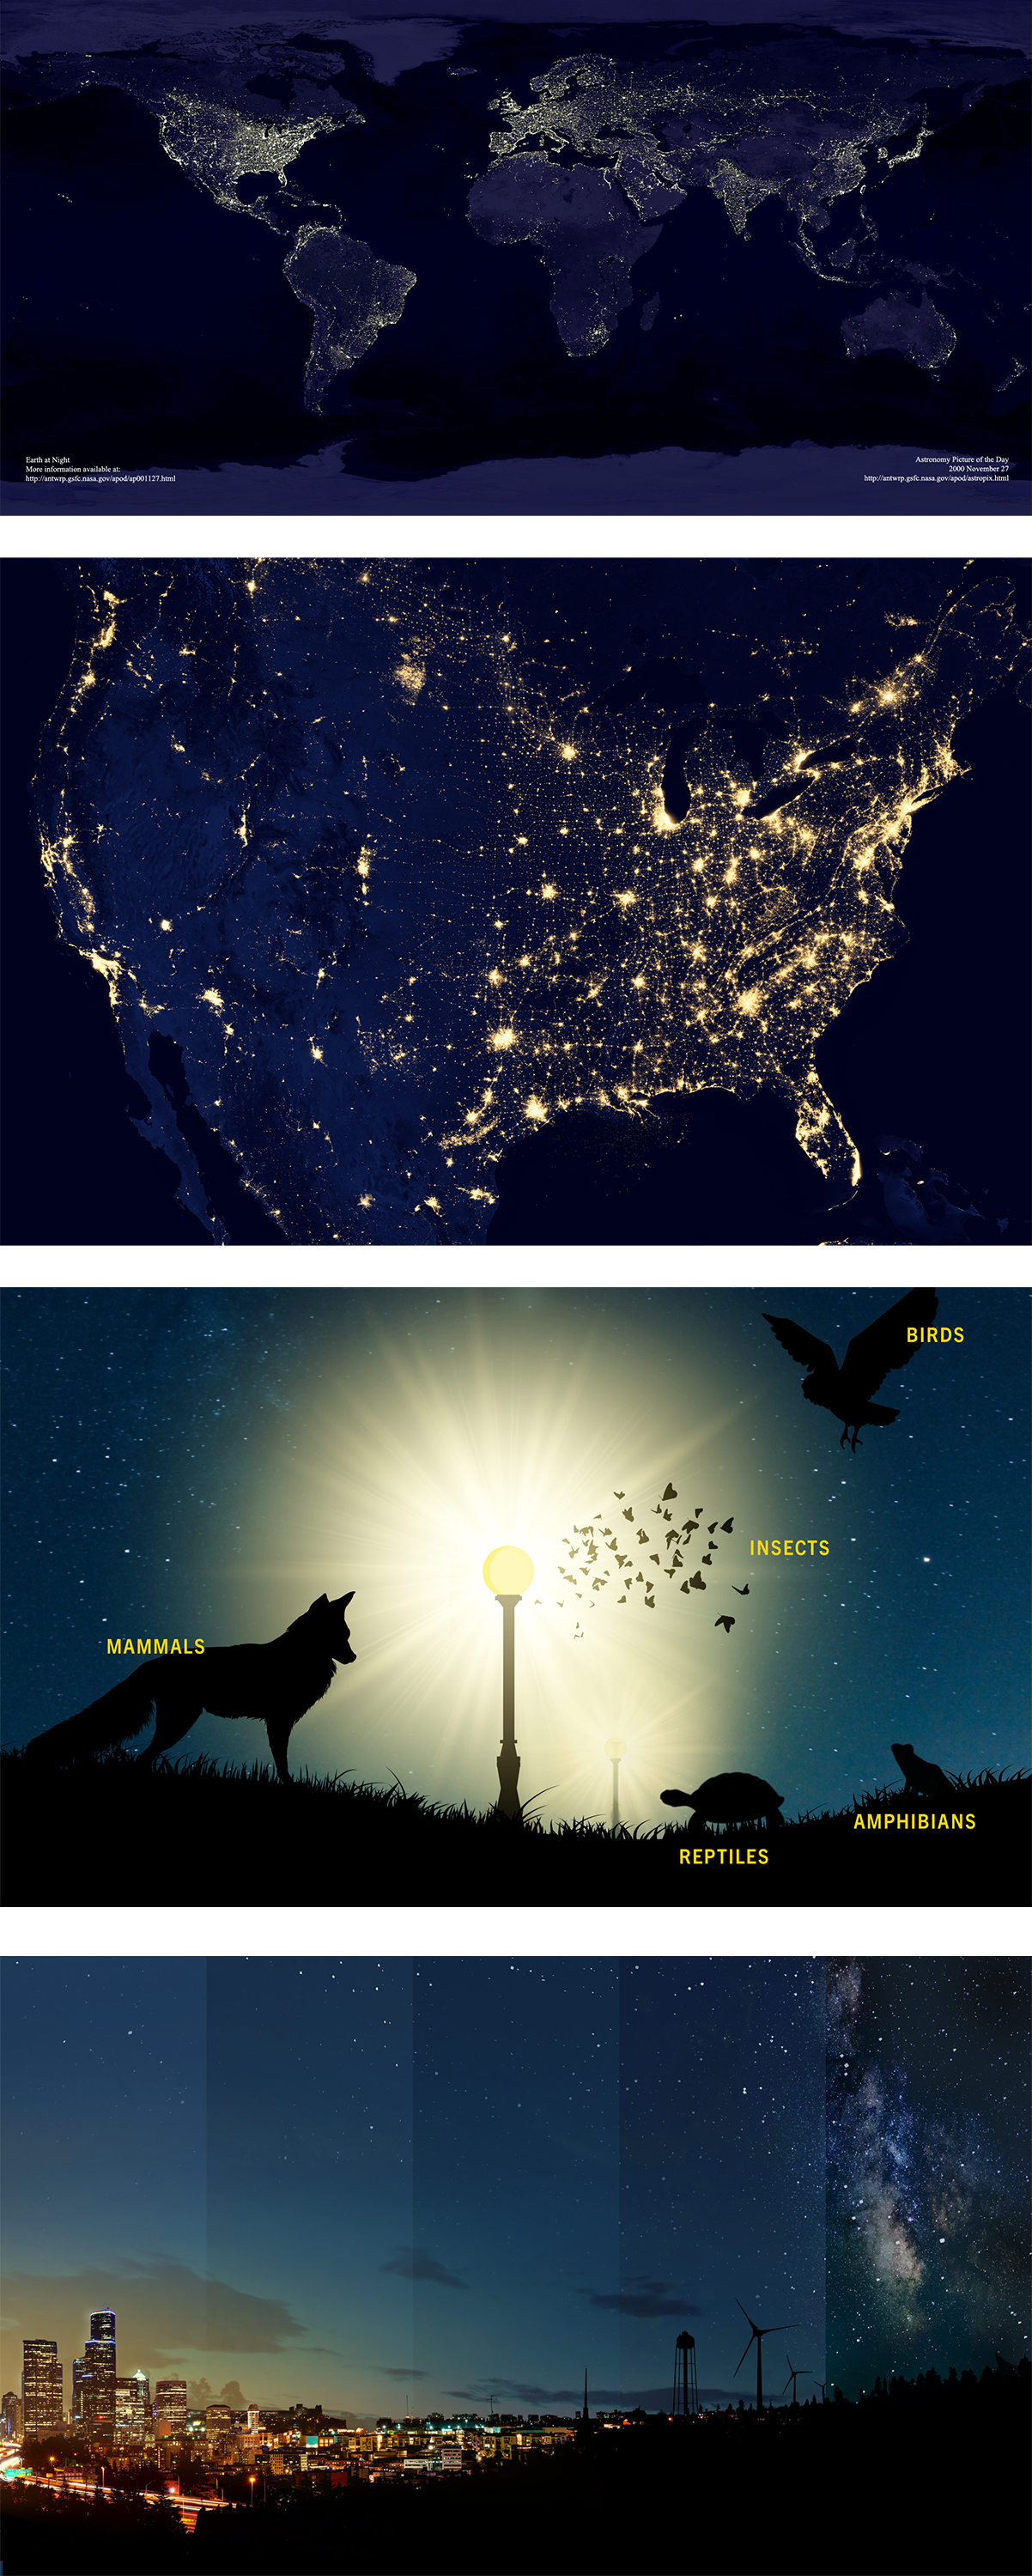 light pollution across the world; bright light shining on a wolf, a turtle, a frog, and some birds